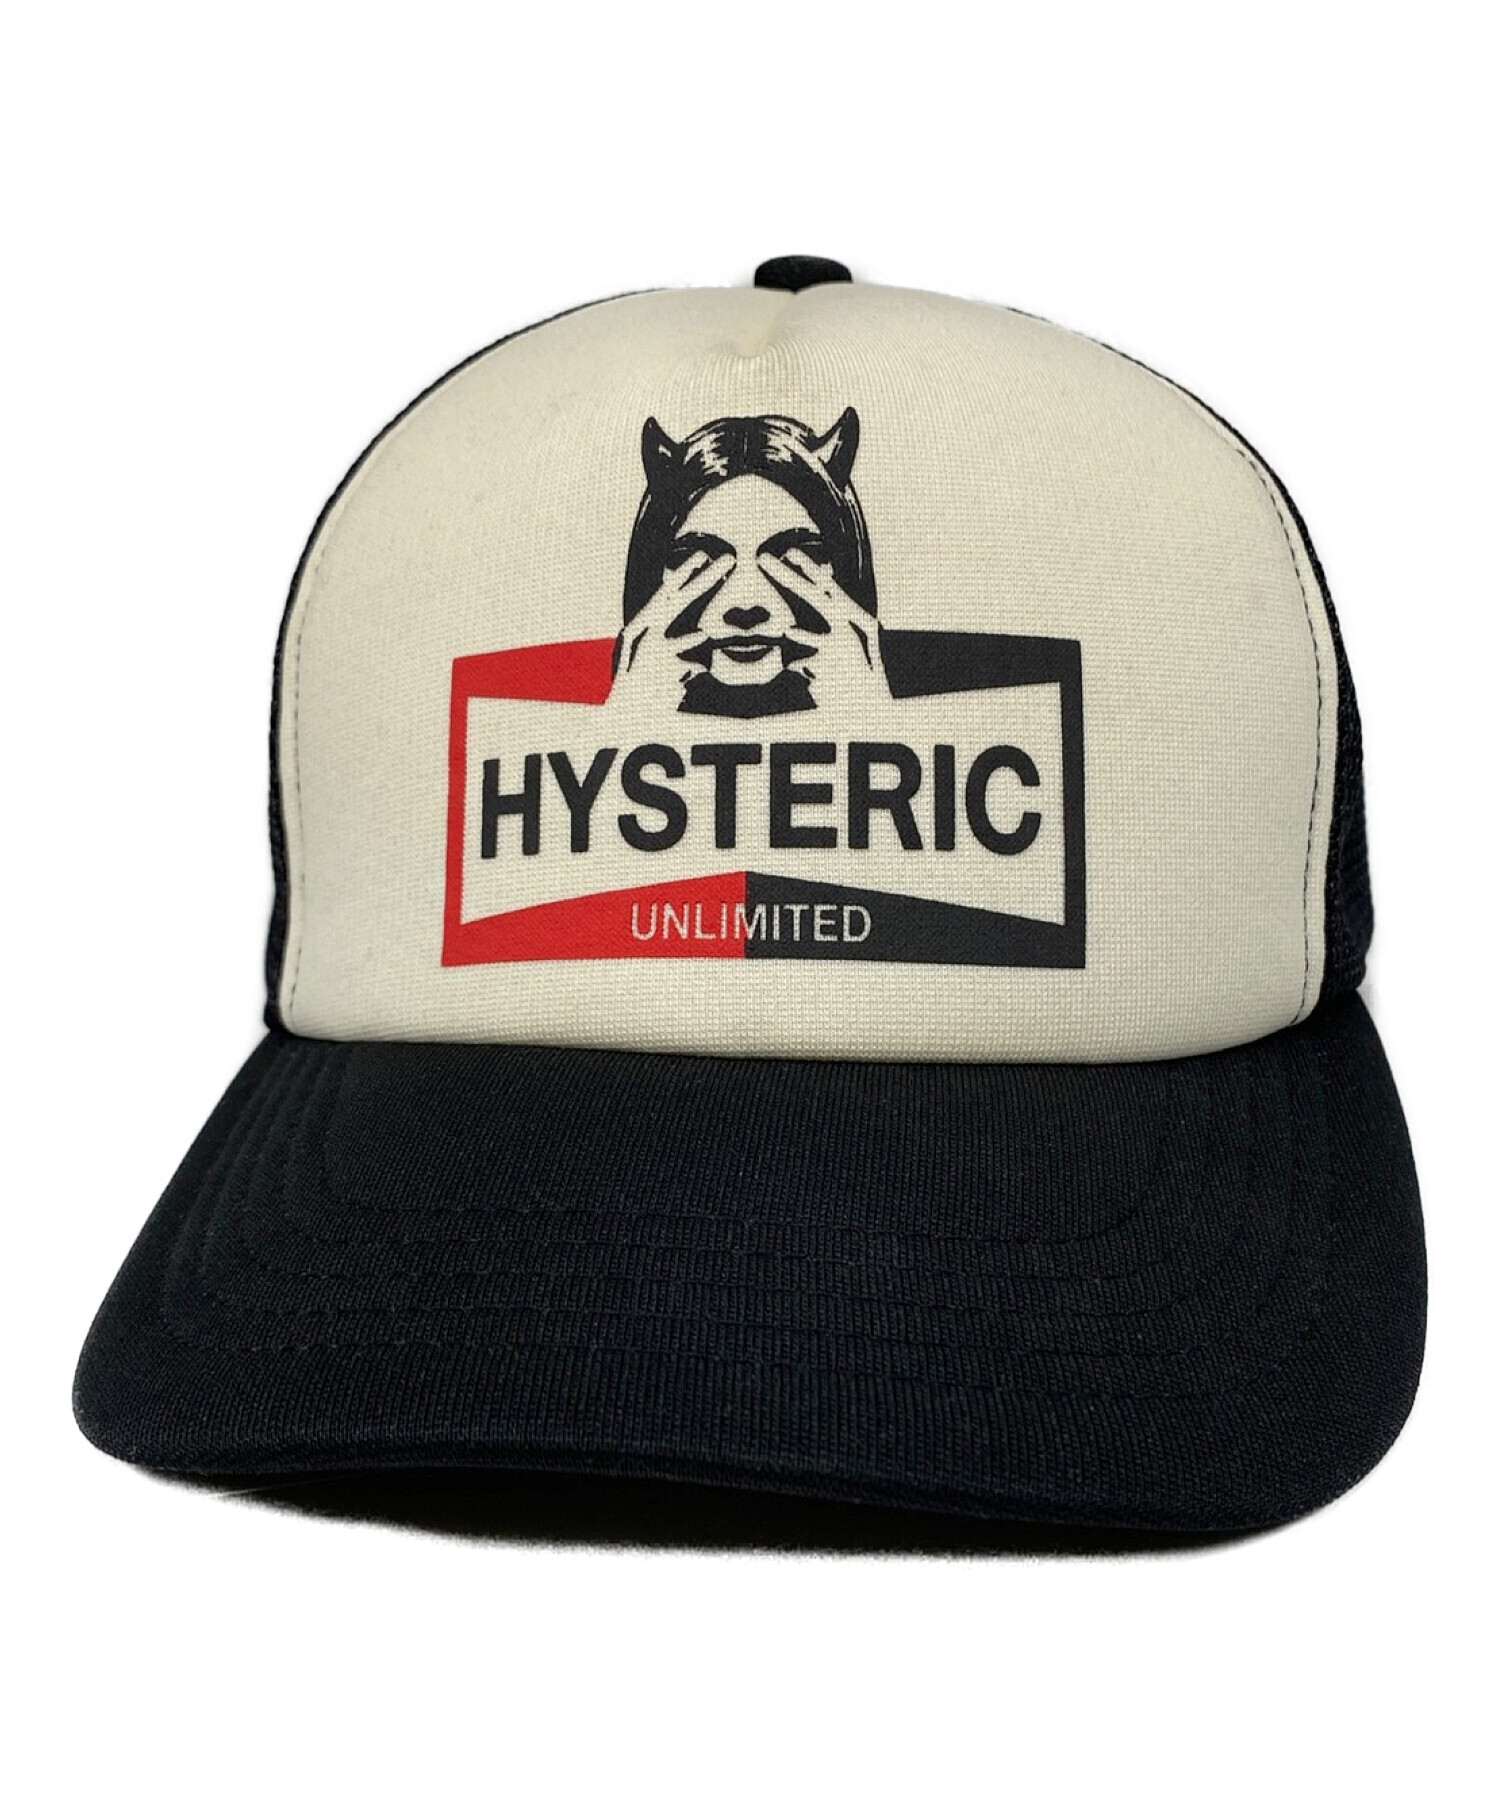 Hysteric Glamour (ヒステリックグラマー) HYSTERIC UNLIMITED メッシュキャップ ブラック